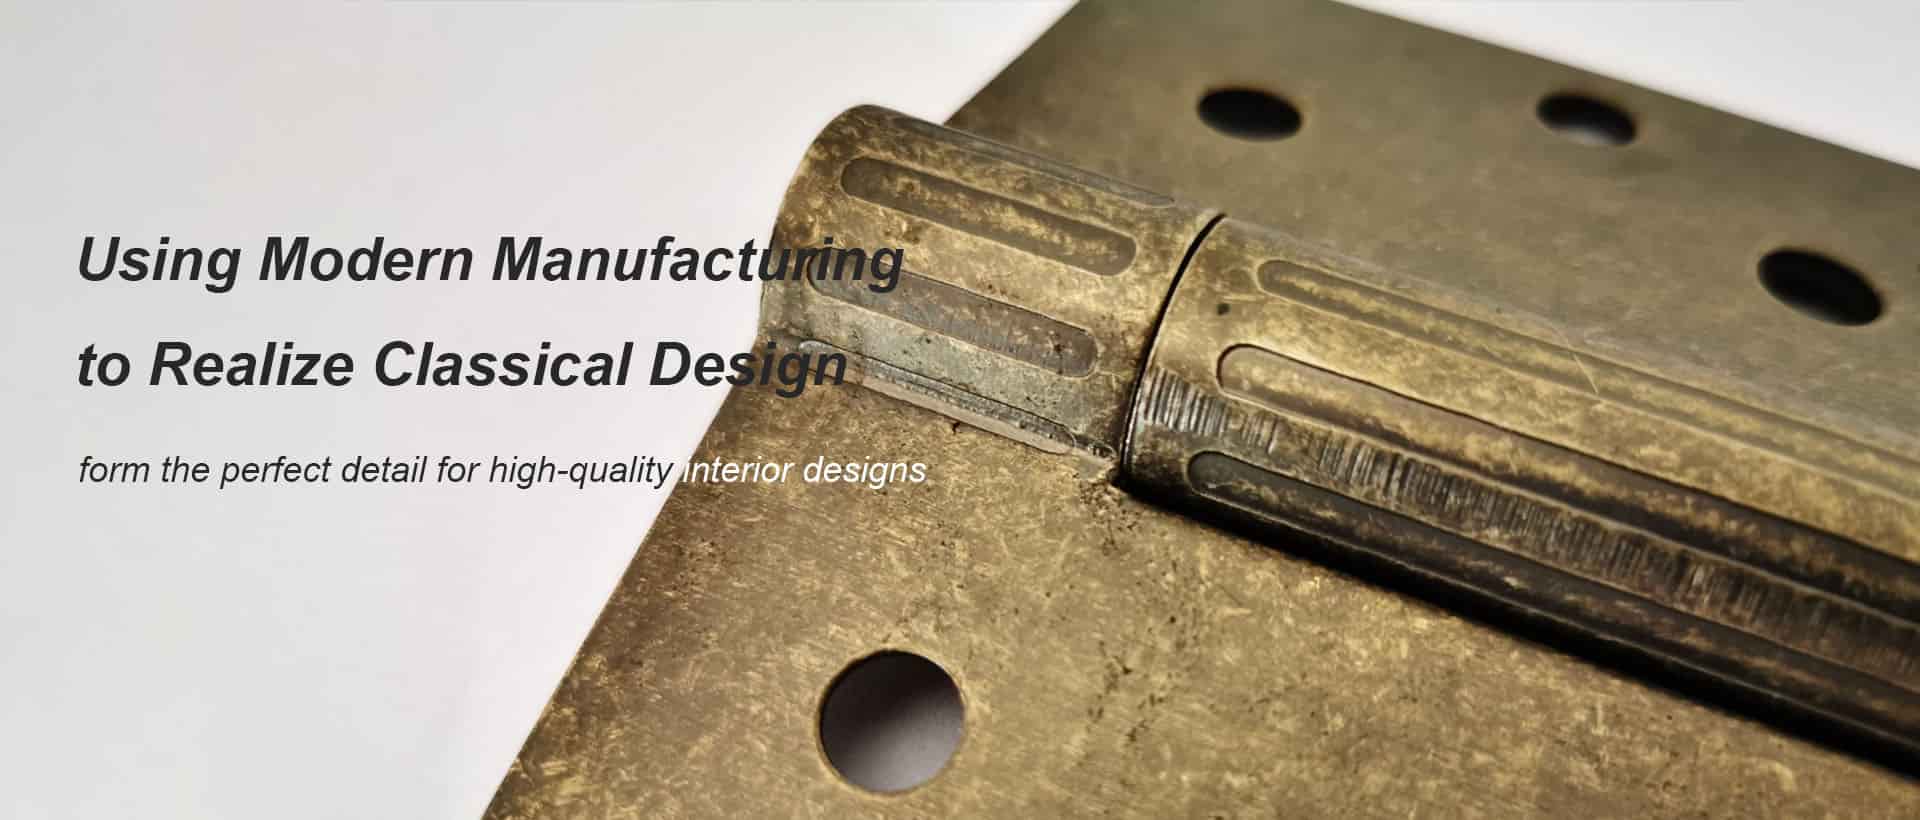 Using Modern Manufacturing to Realize Classical Design